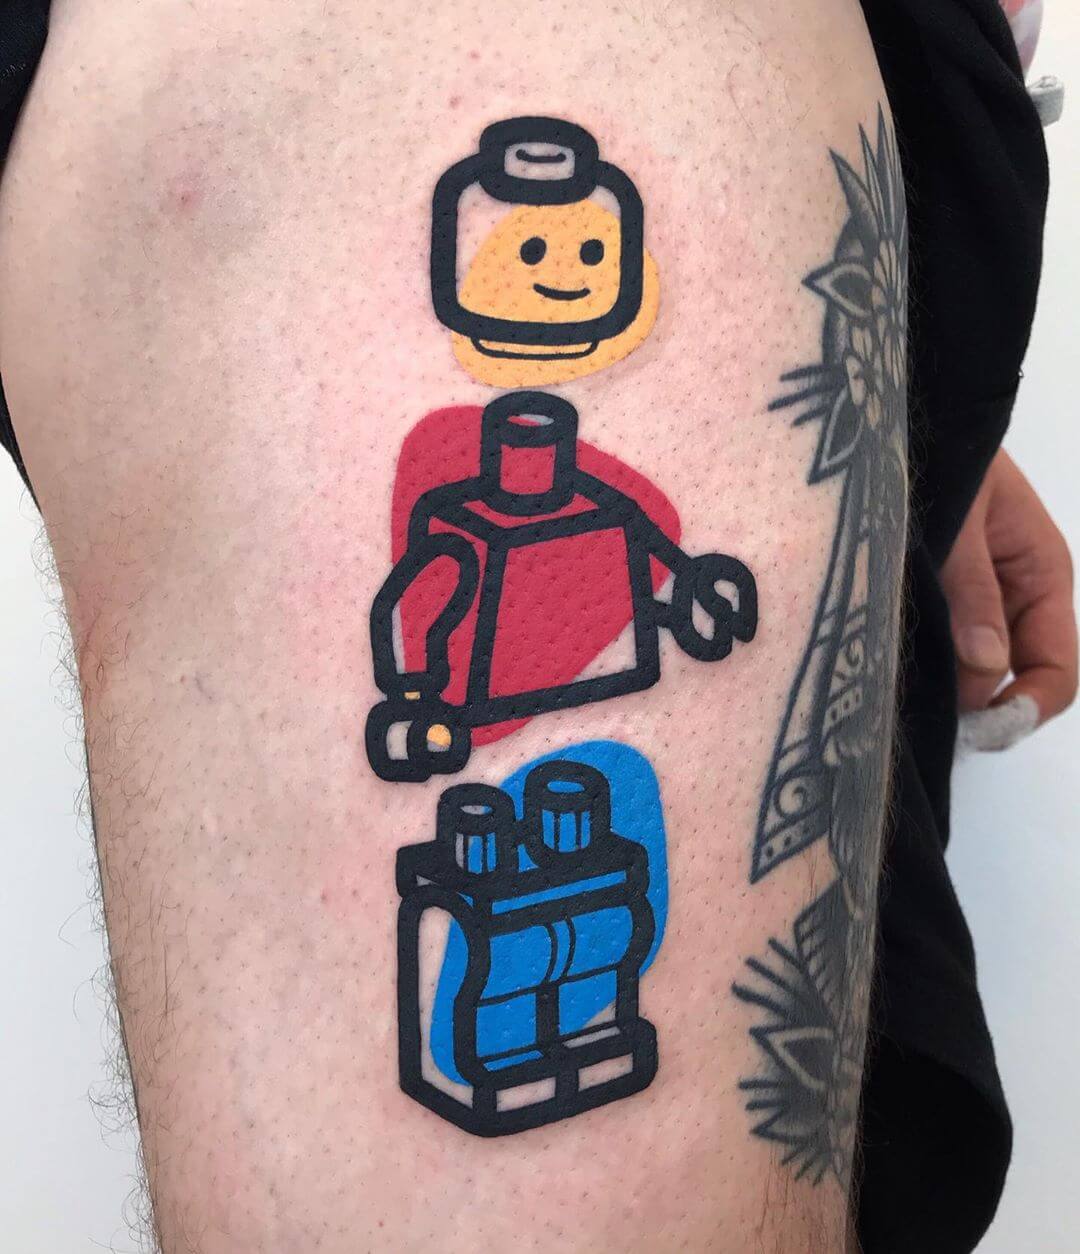 Got my favorite tattoo yet! How does it look? : r/lego